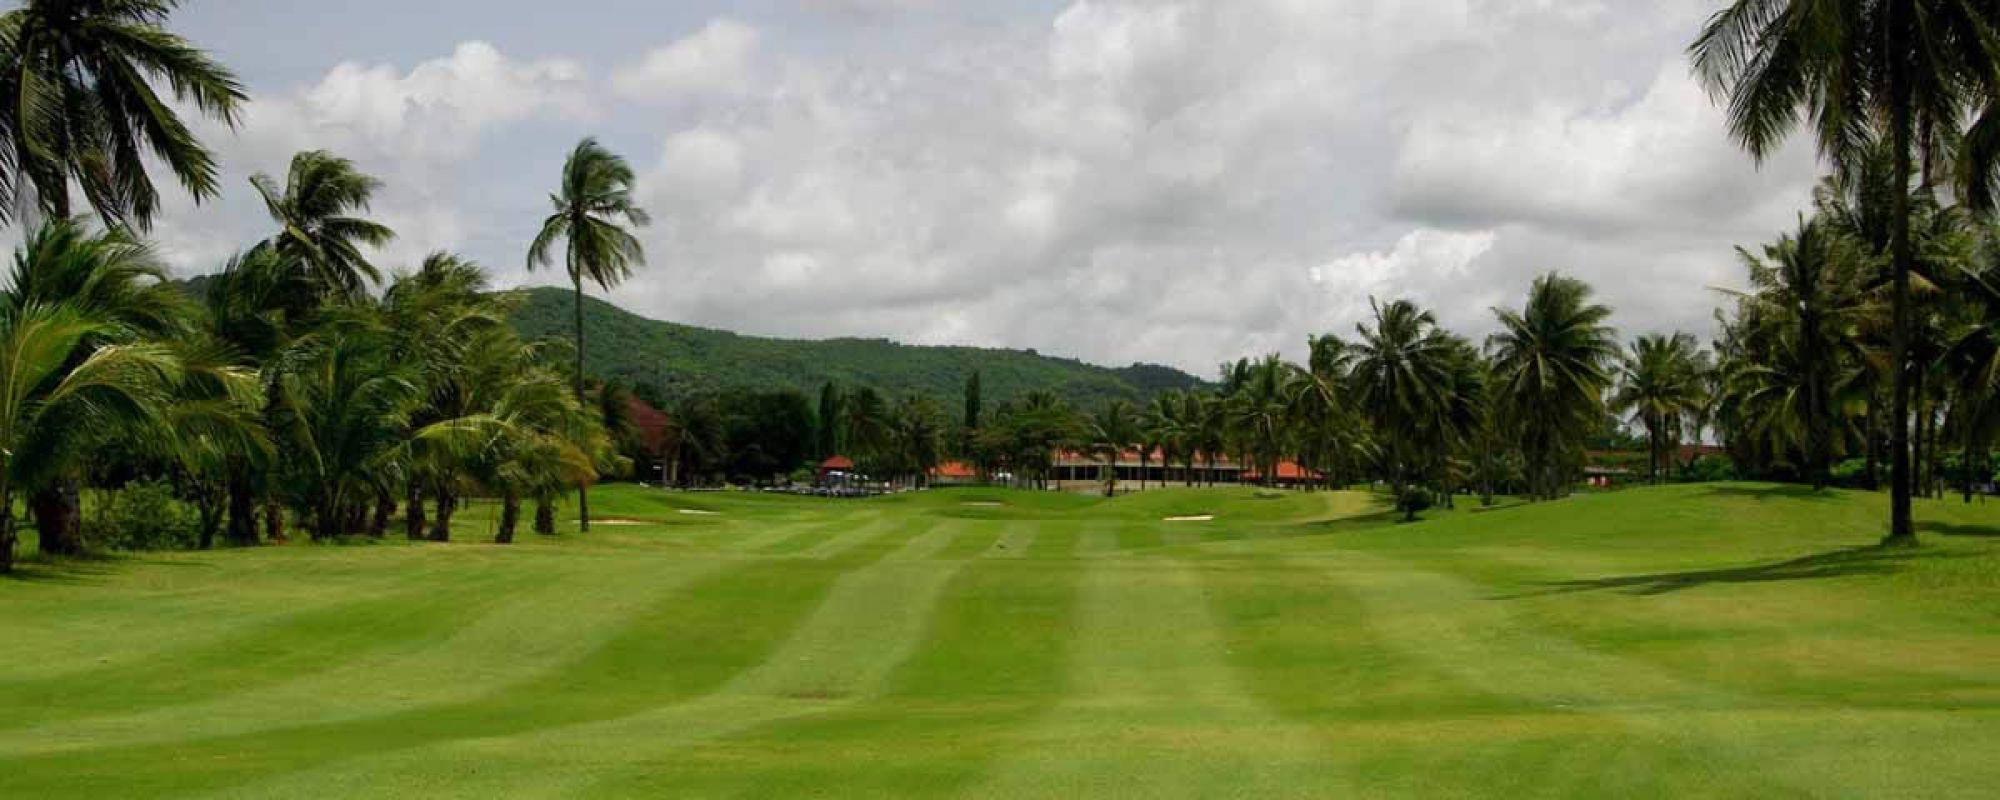 View Eastern Star Country Club's lovely golf course situated in brilliant Pattaya.